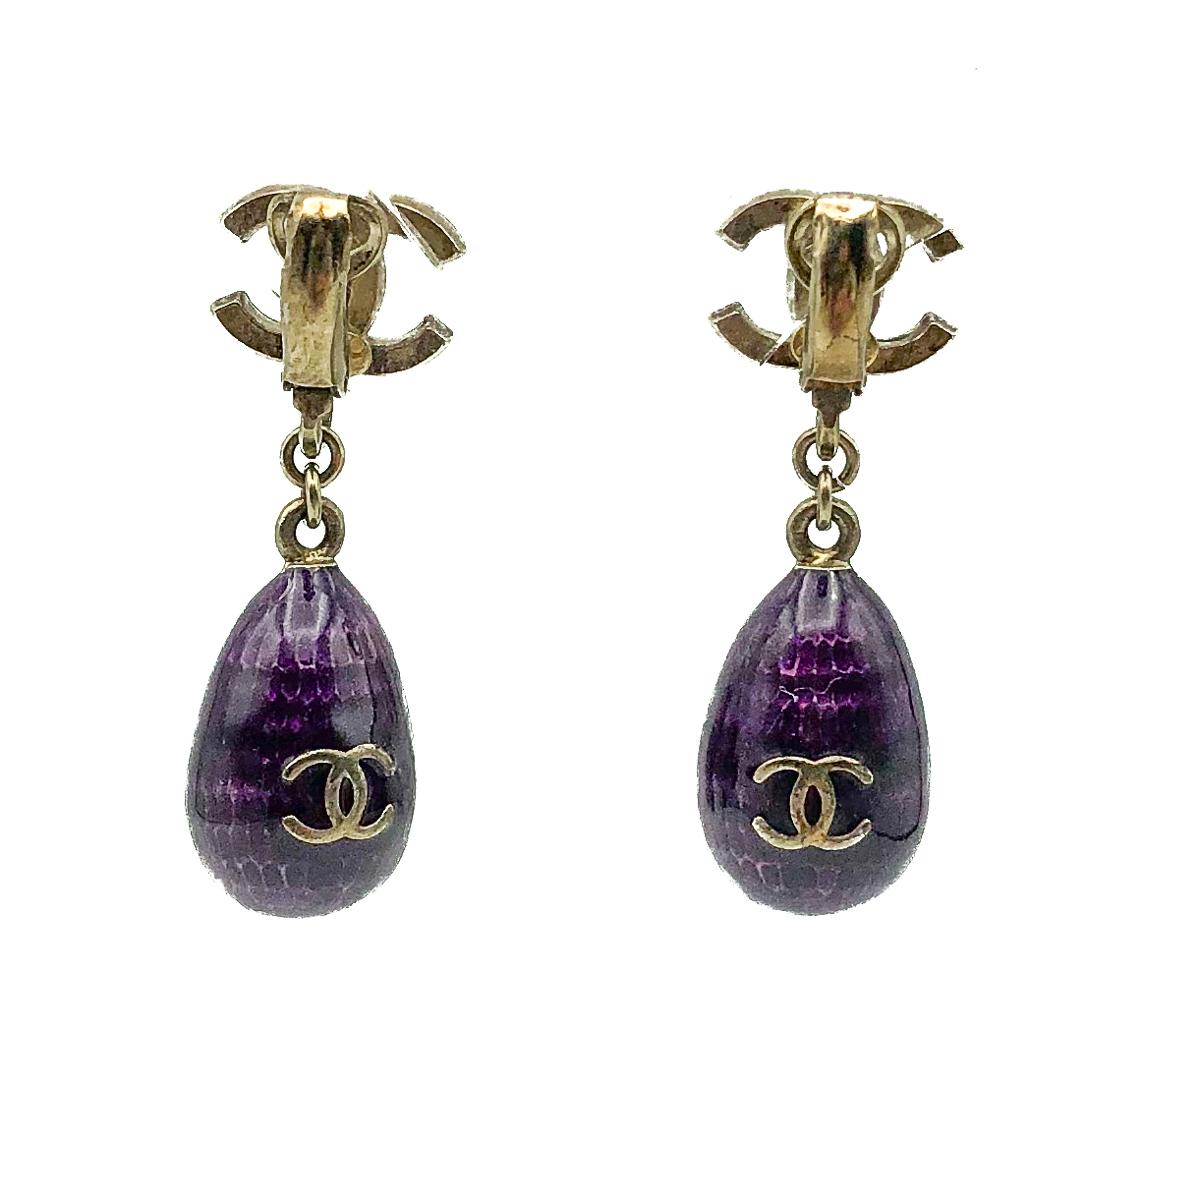 Divine Vintage Chanel Purple Bomb Earrings. Crafted with brushed antiqued gold plated metal, glass enamel and glass crystals. The top and drop is of solid construction and the overall quality of these earrings is exceptional. Featuring the iconic